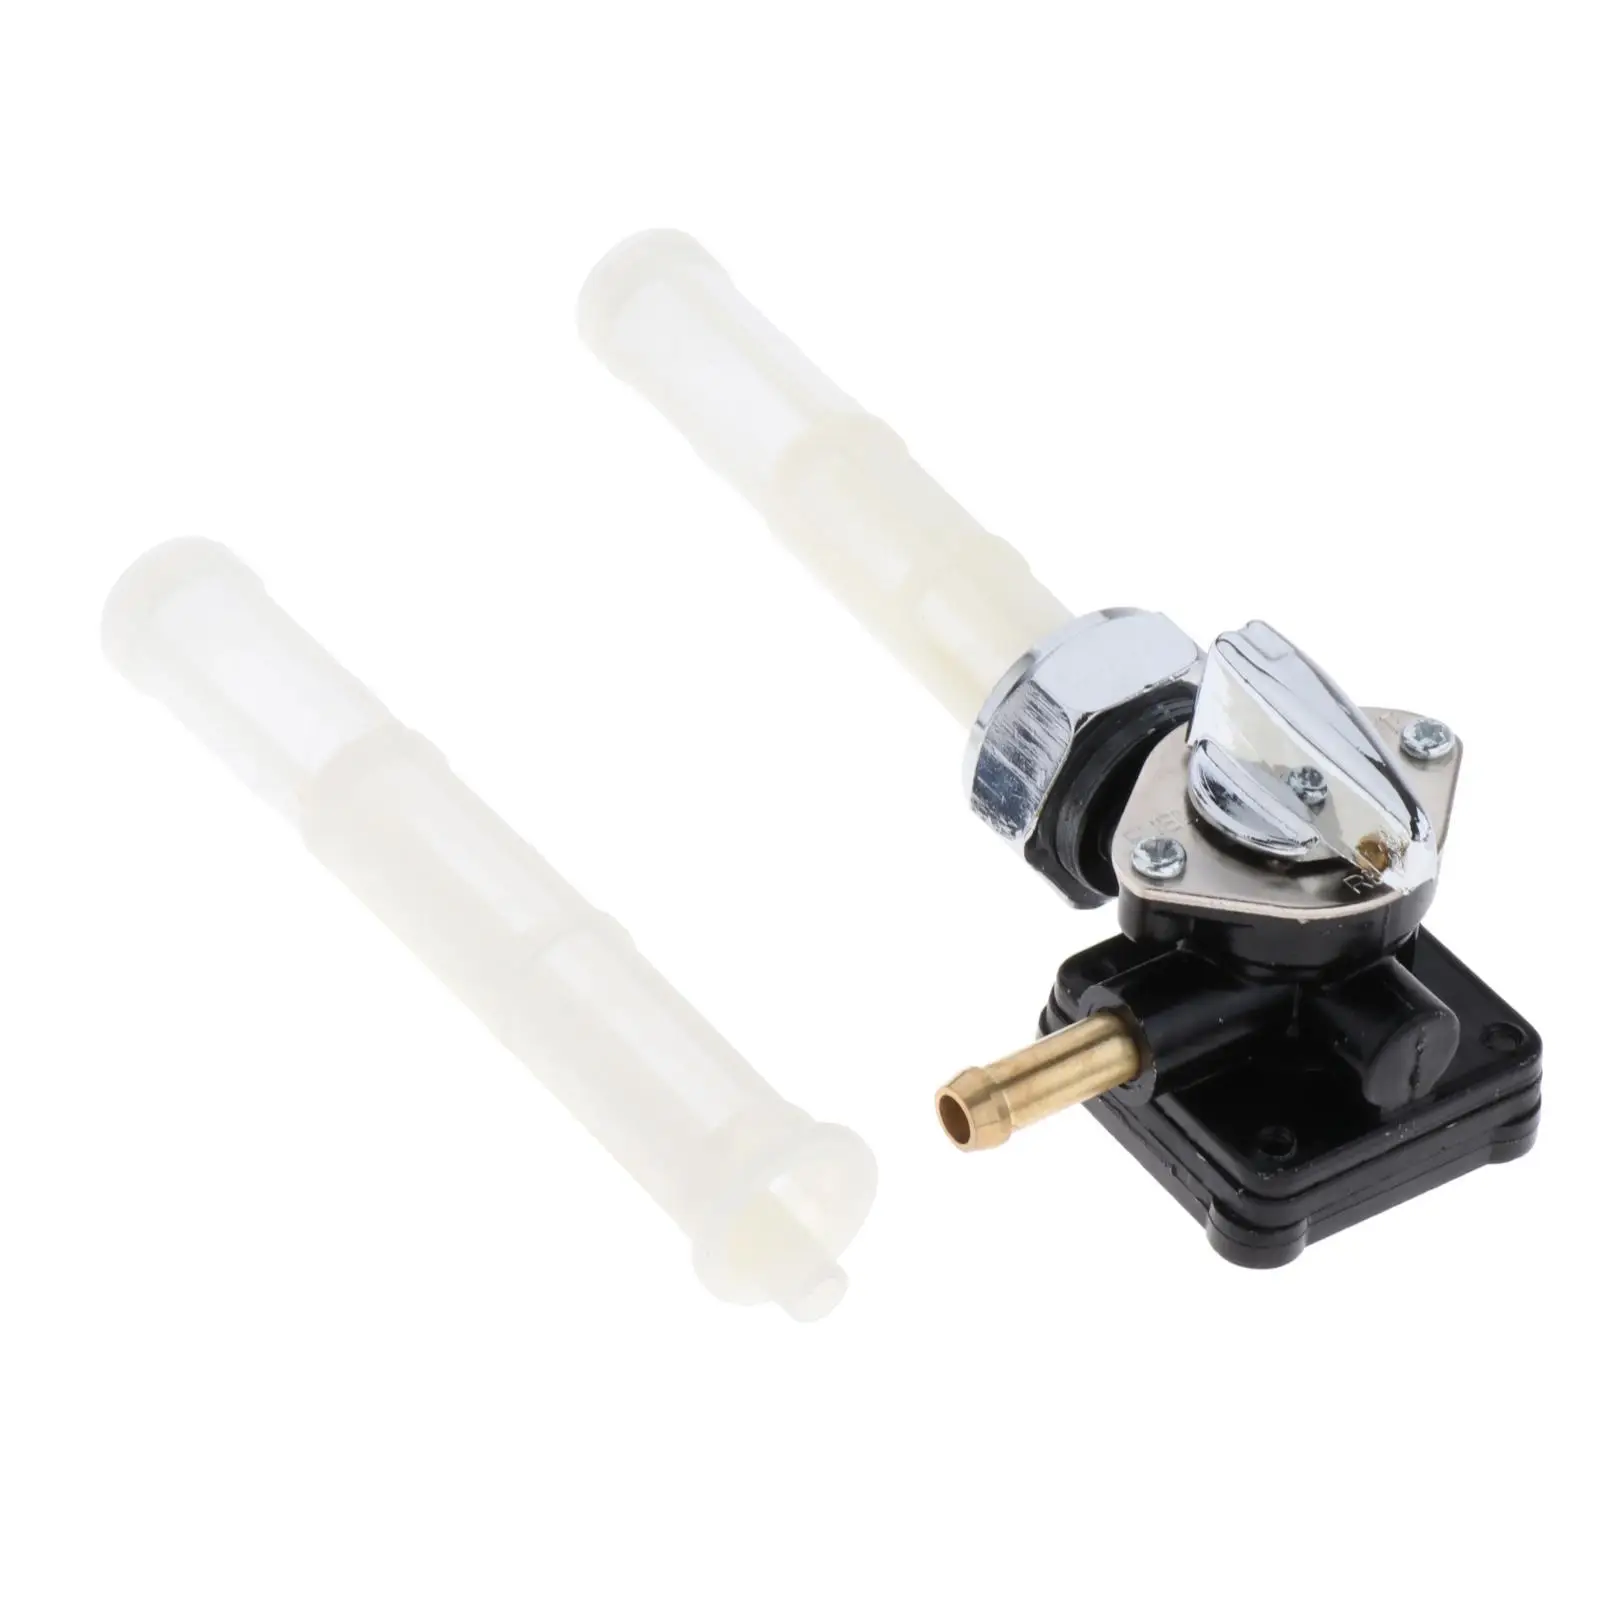 Fuel Switch Valve Petcock Strong with Filter Mesh 61338-94 Shut Off Switch for Flst Replacement Motorcycle Supplies Parts